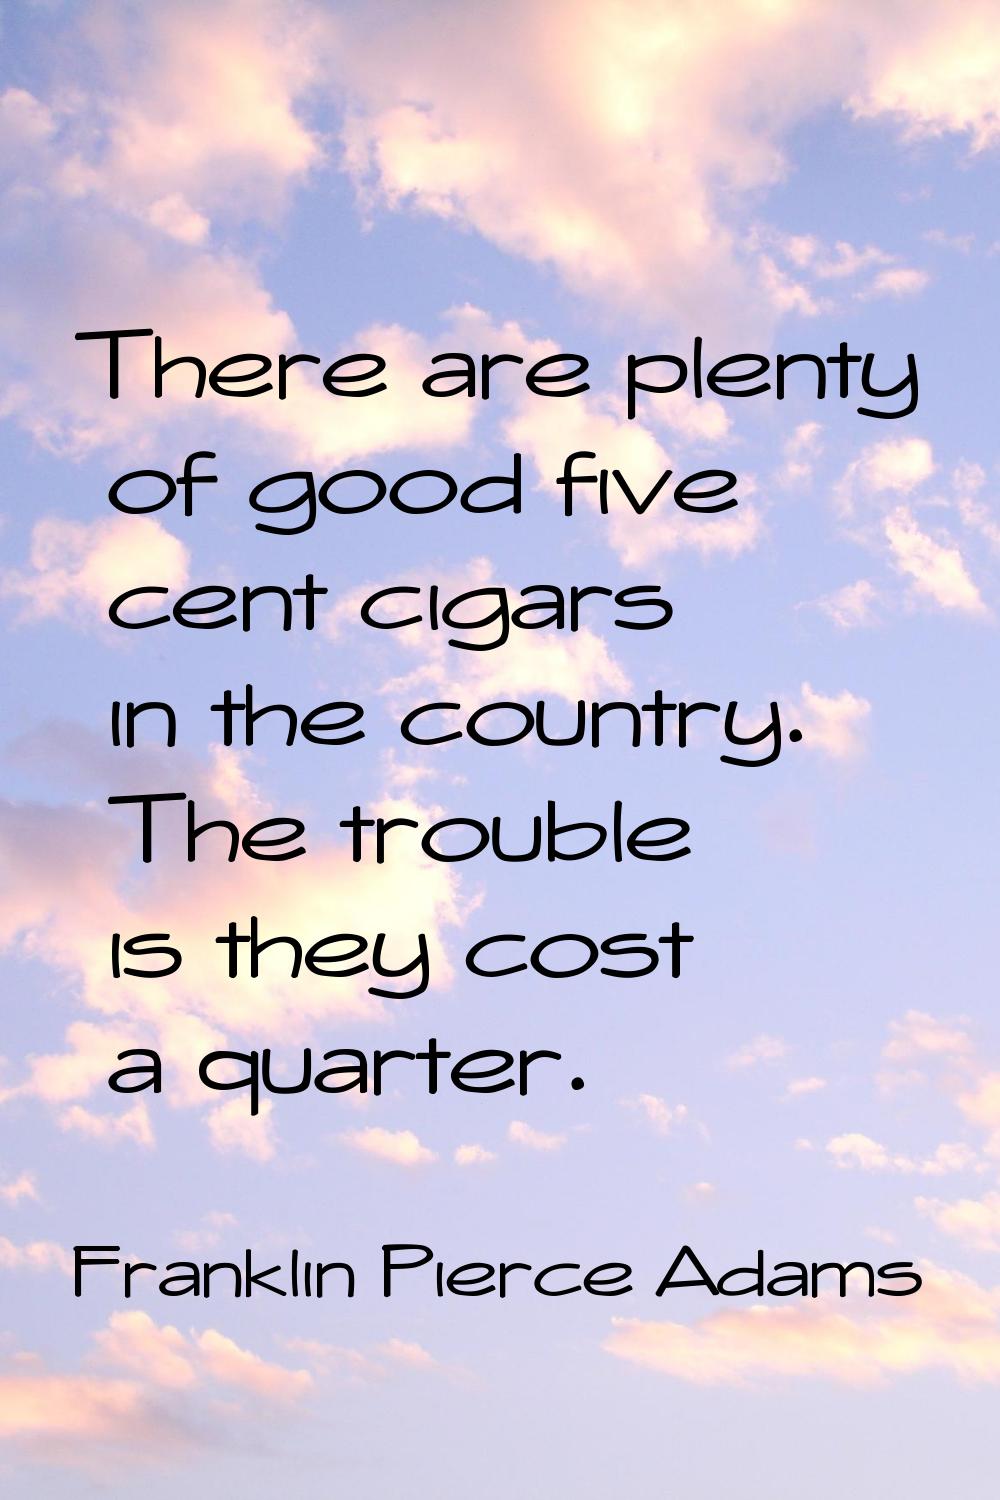 There are plenty of good five cent cigars in the country. The trouble is they cost a quarter.